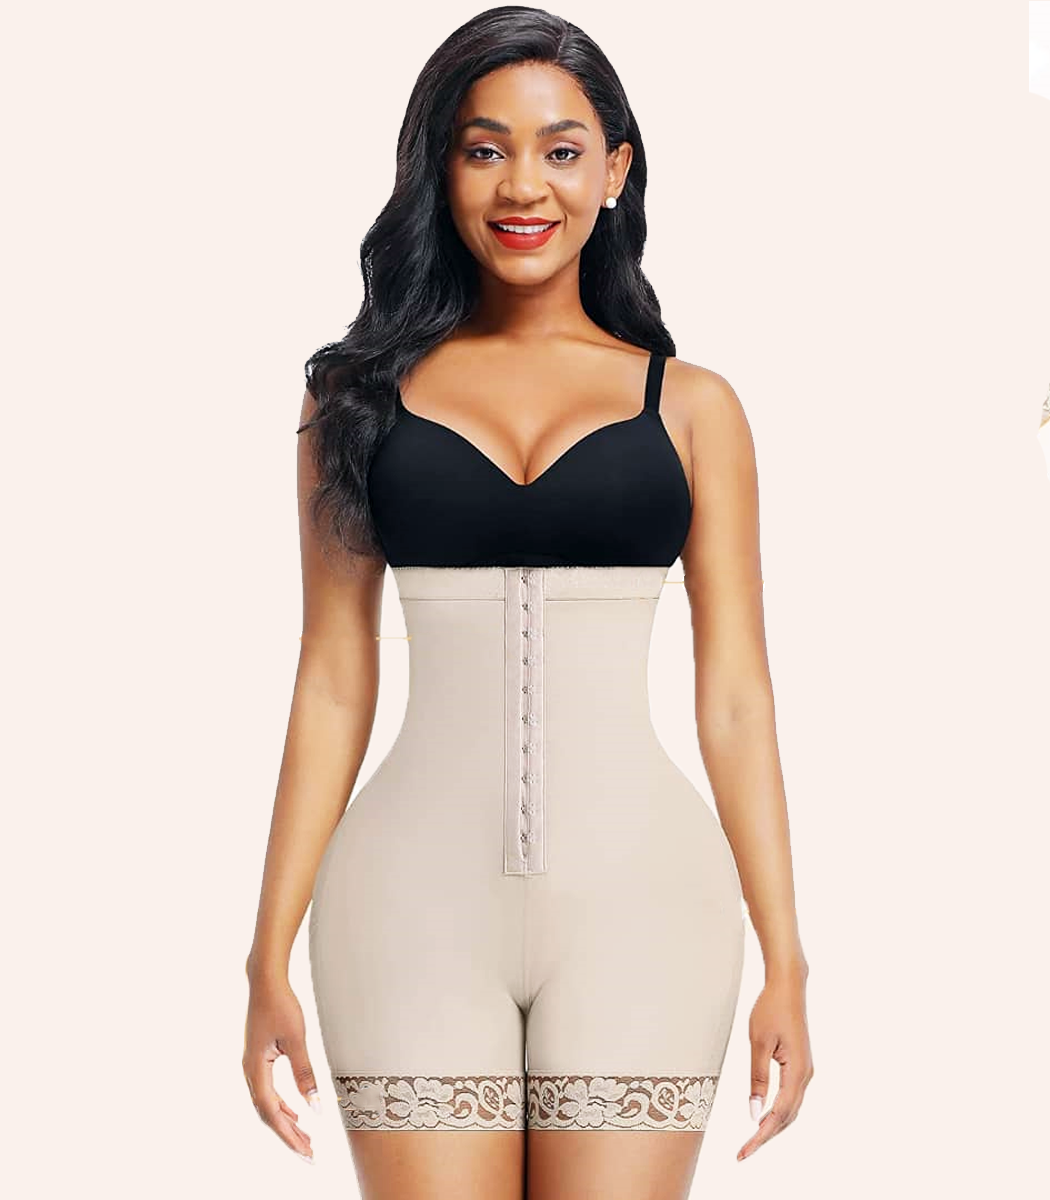 Royal's slim, postpartum shapewear with open crotch, hooks, and